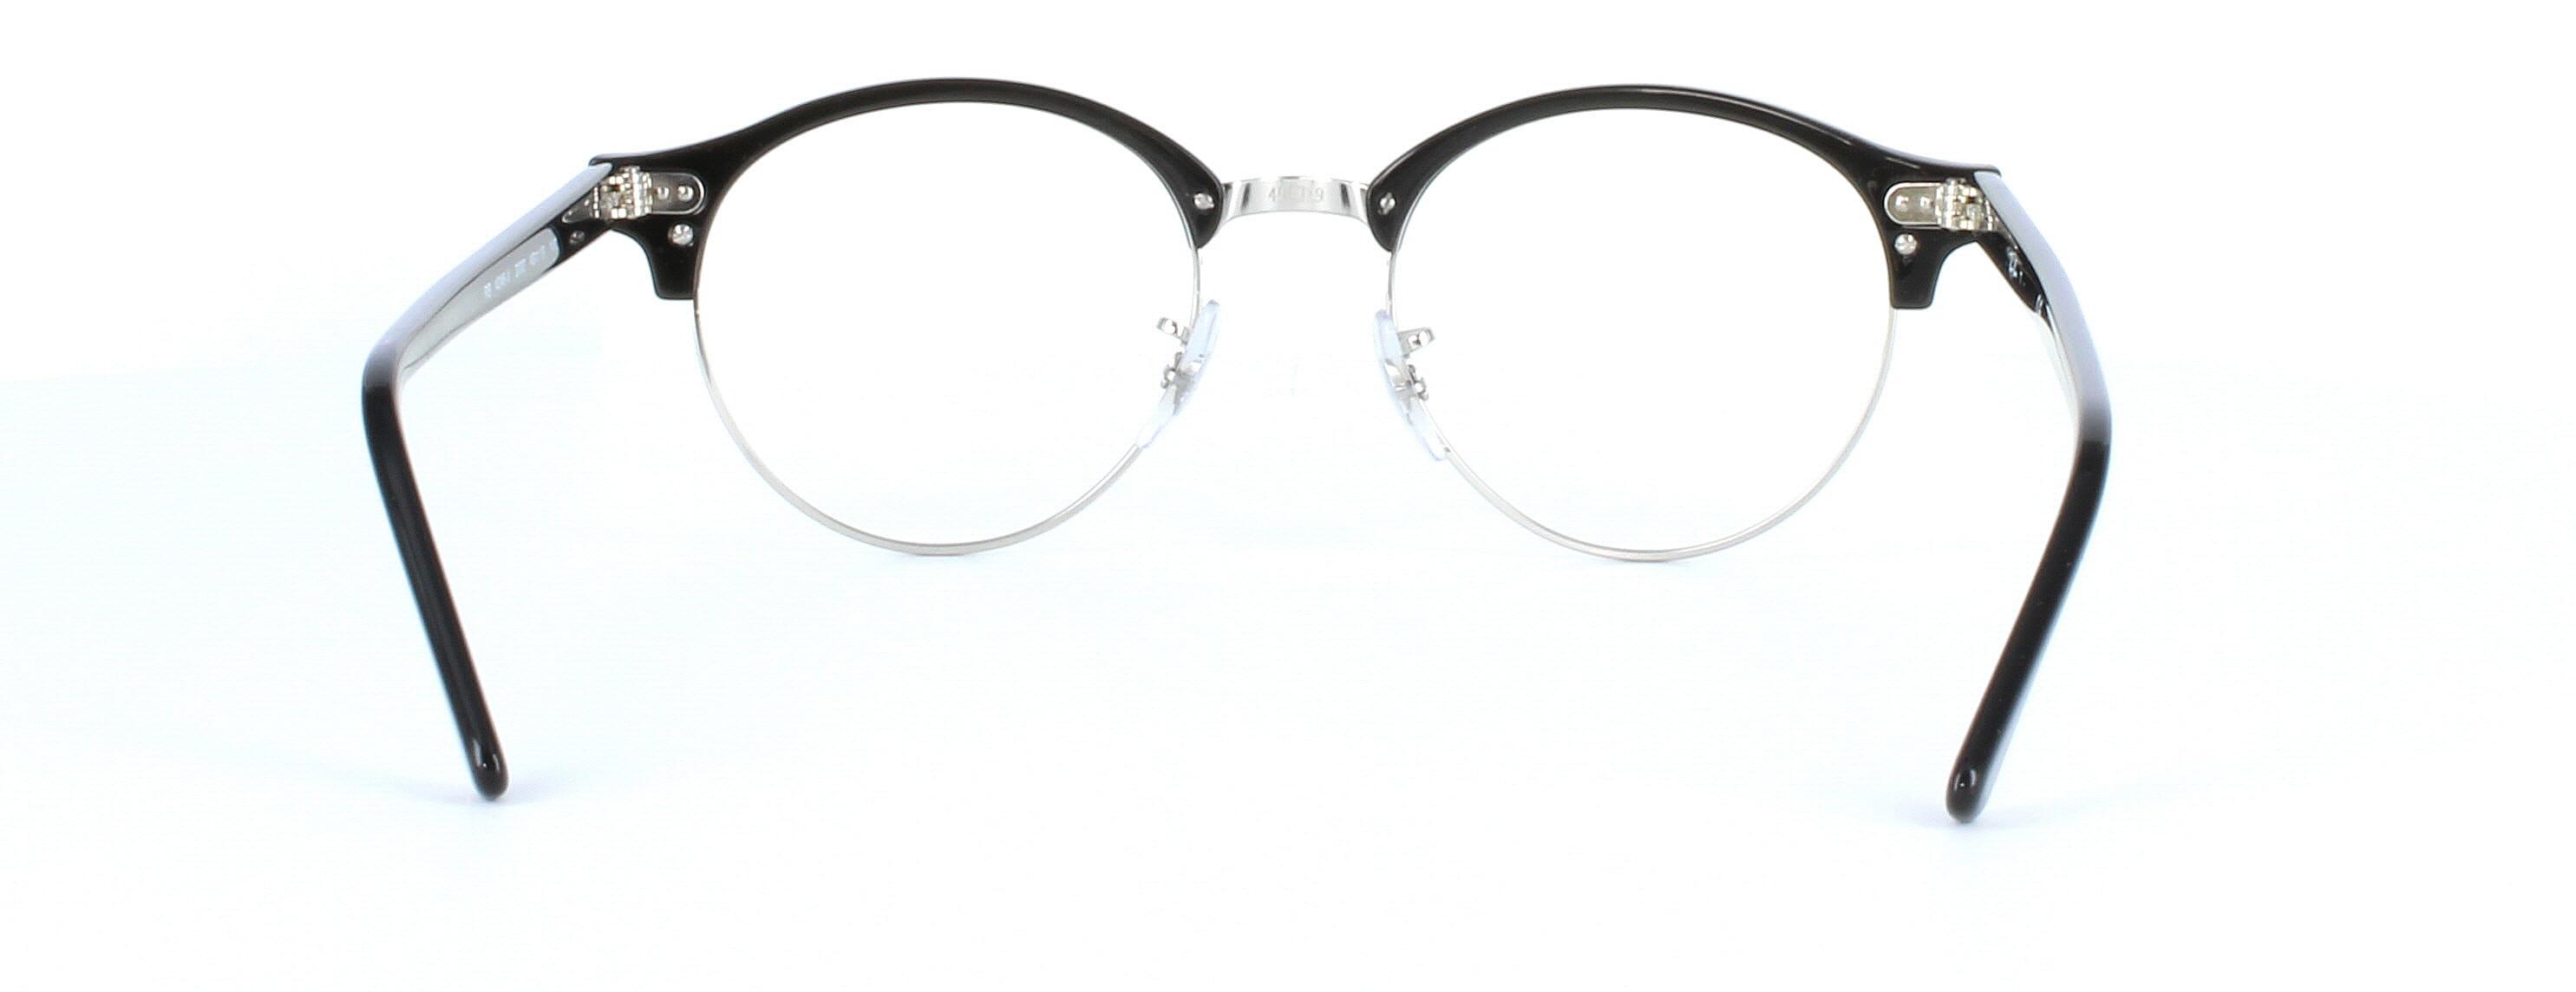 Ray Ban 4246 - Women's round shaped plastic and metal frame by Ray Ban - Black & silver - image view 3